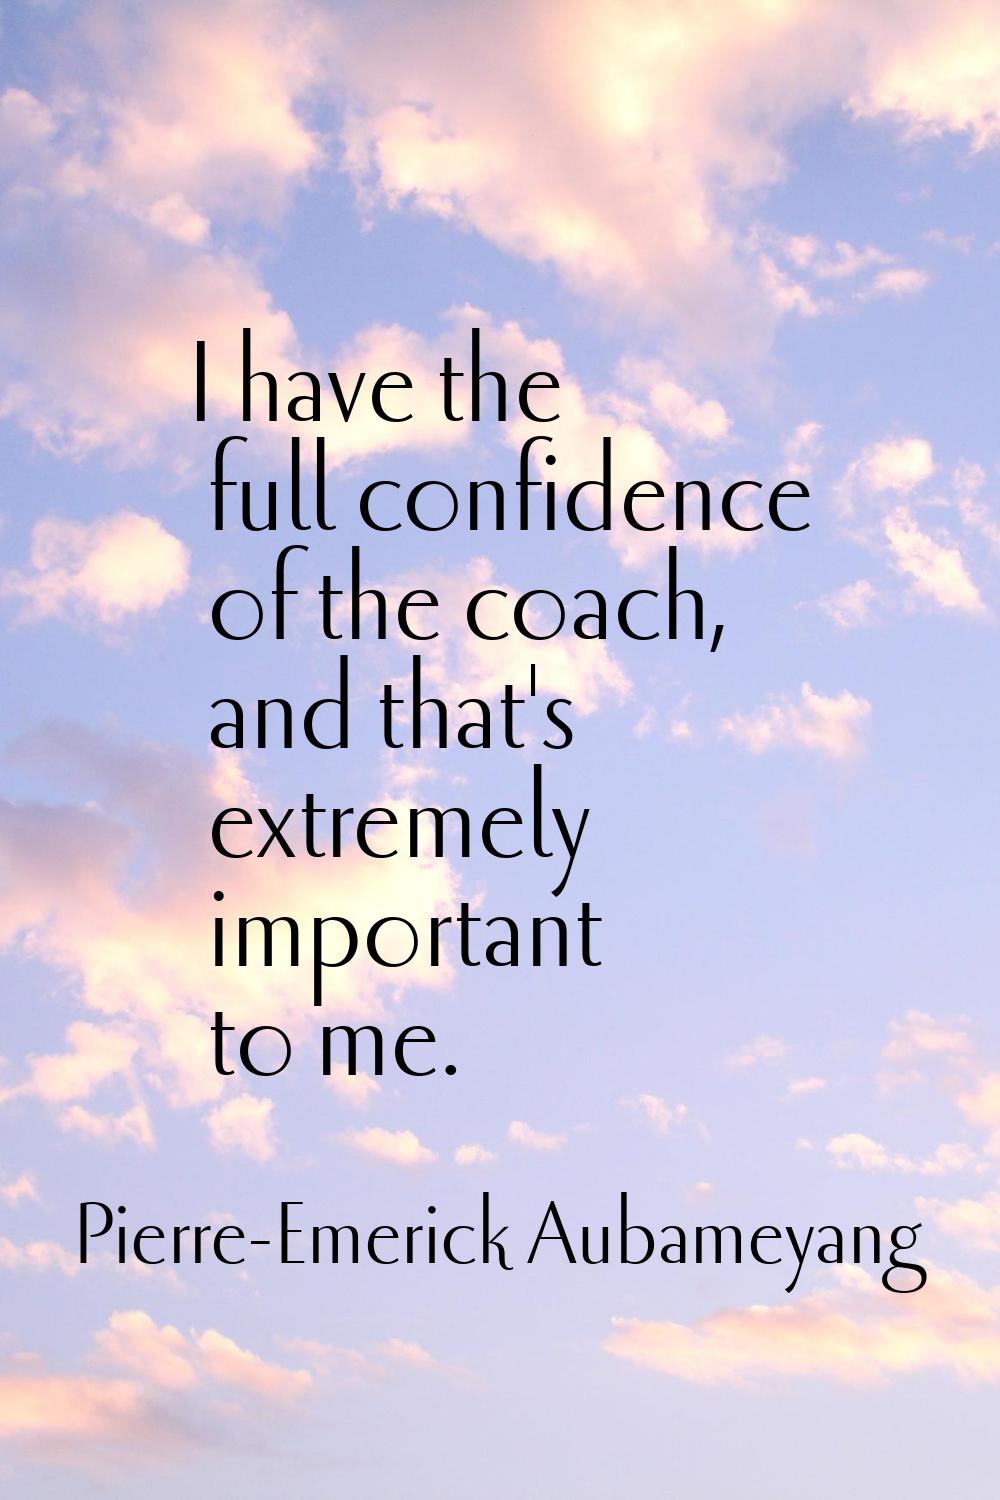 I have the full confidence of the coach, and that's extremely important to me.